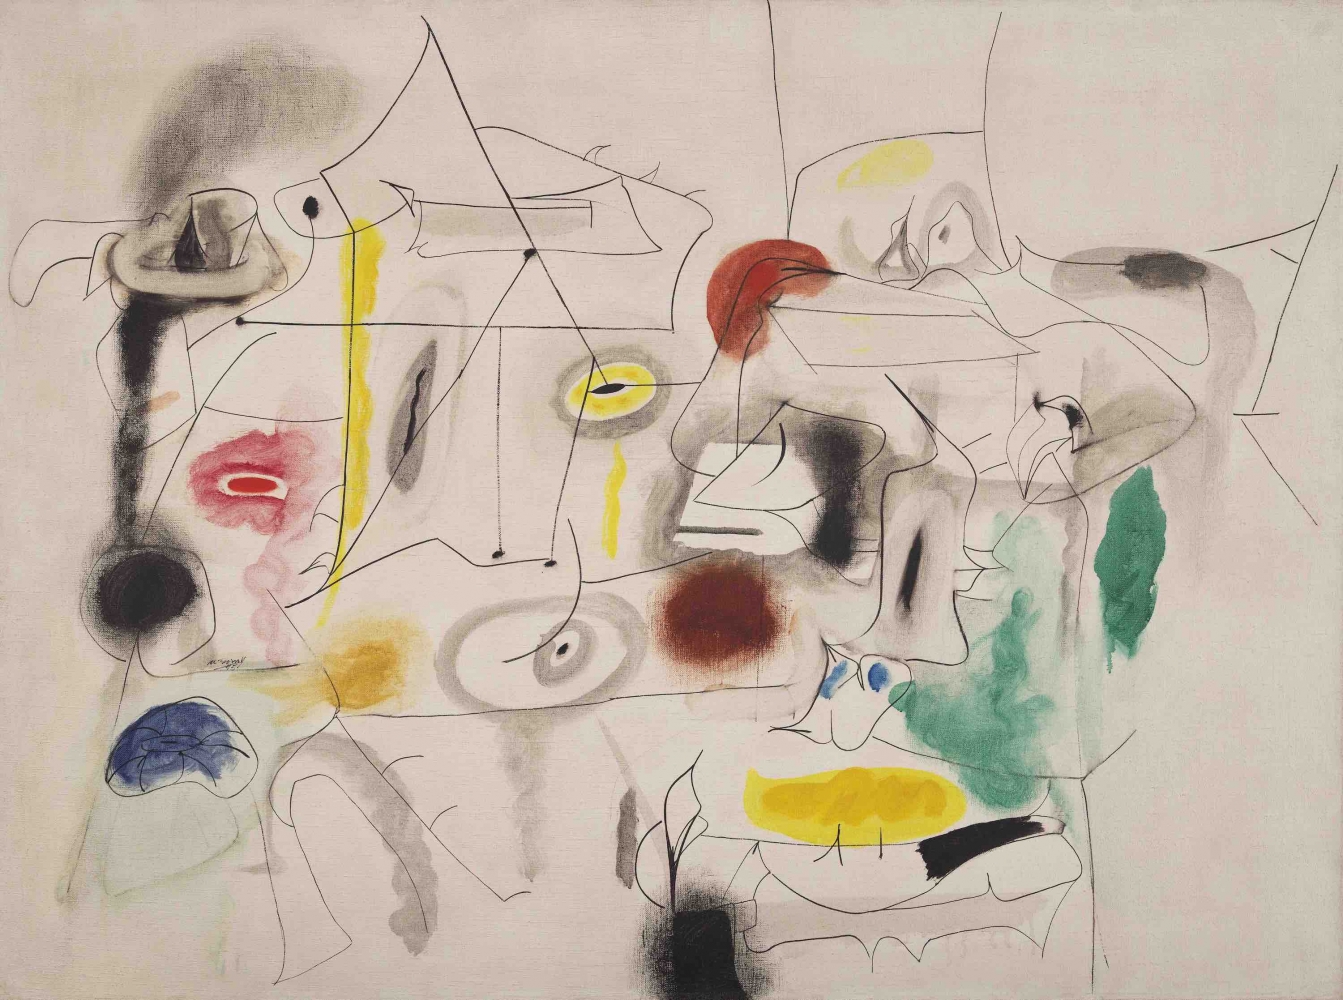 Child's Companions, a 1945 painting by Arshile Gorky.